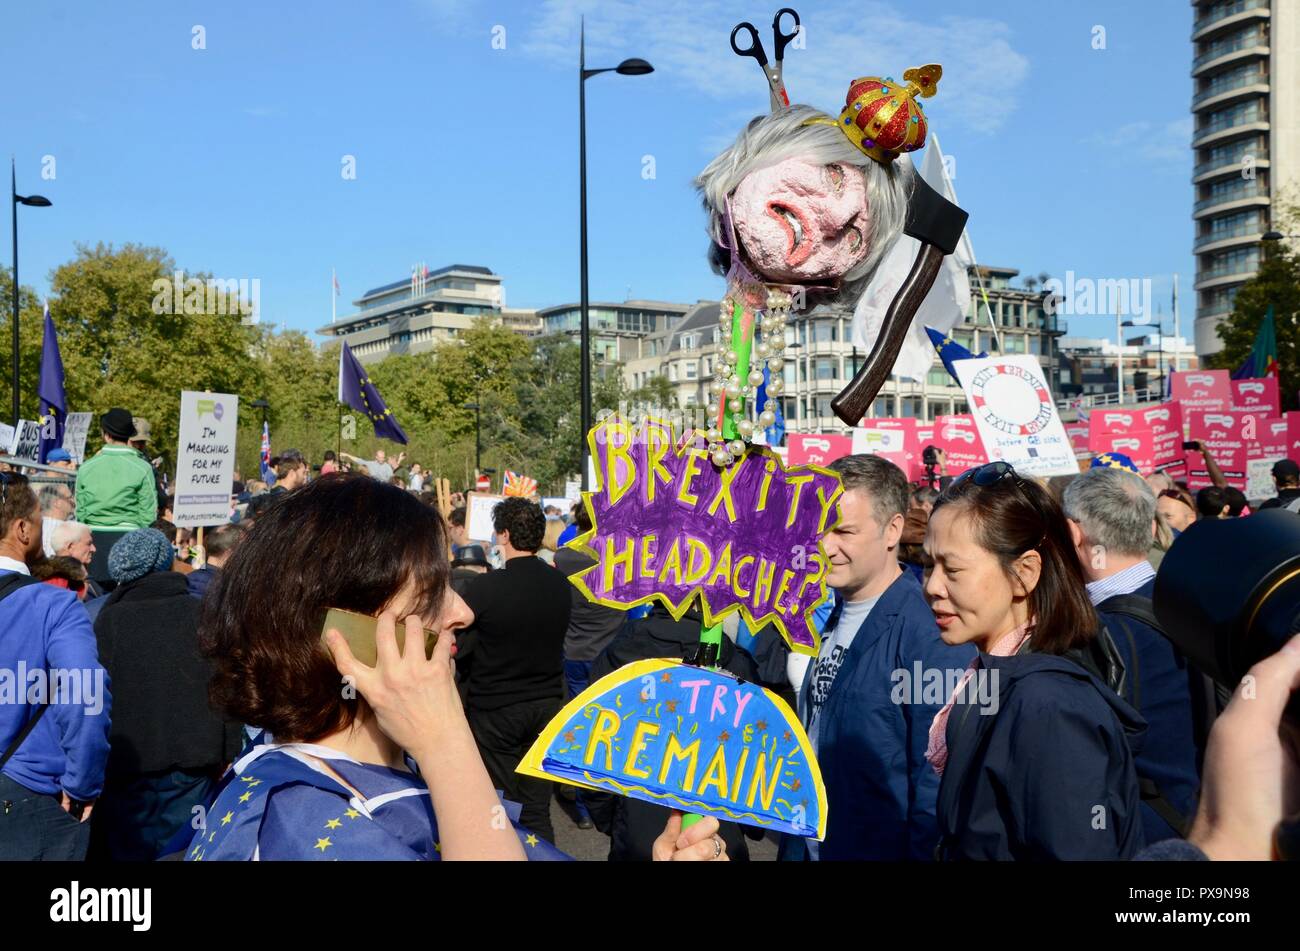 Peoples march anti brexit demonstration in london oct 20th 2018 UK Stock Photo